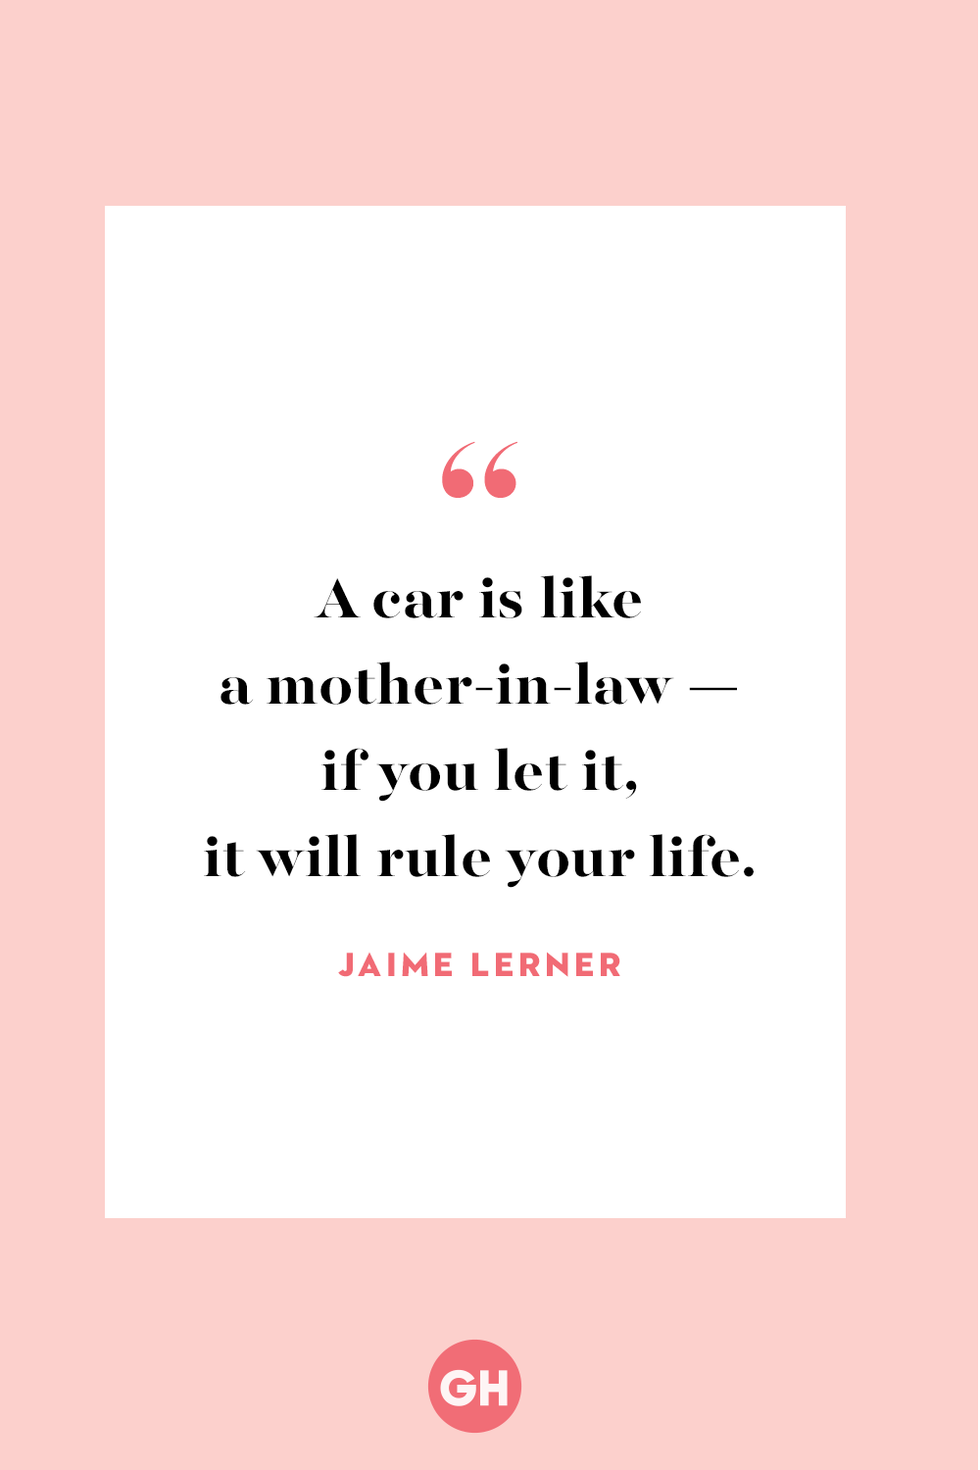 30 Best Mother In Law Quotes And Sayings